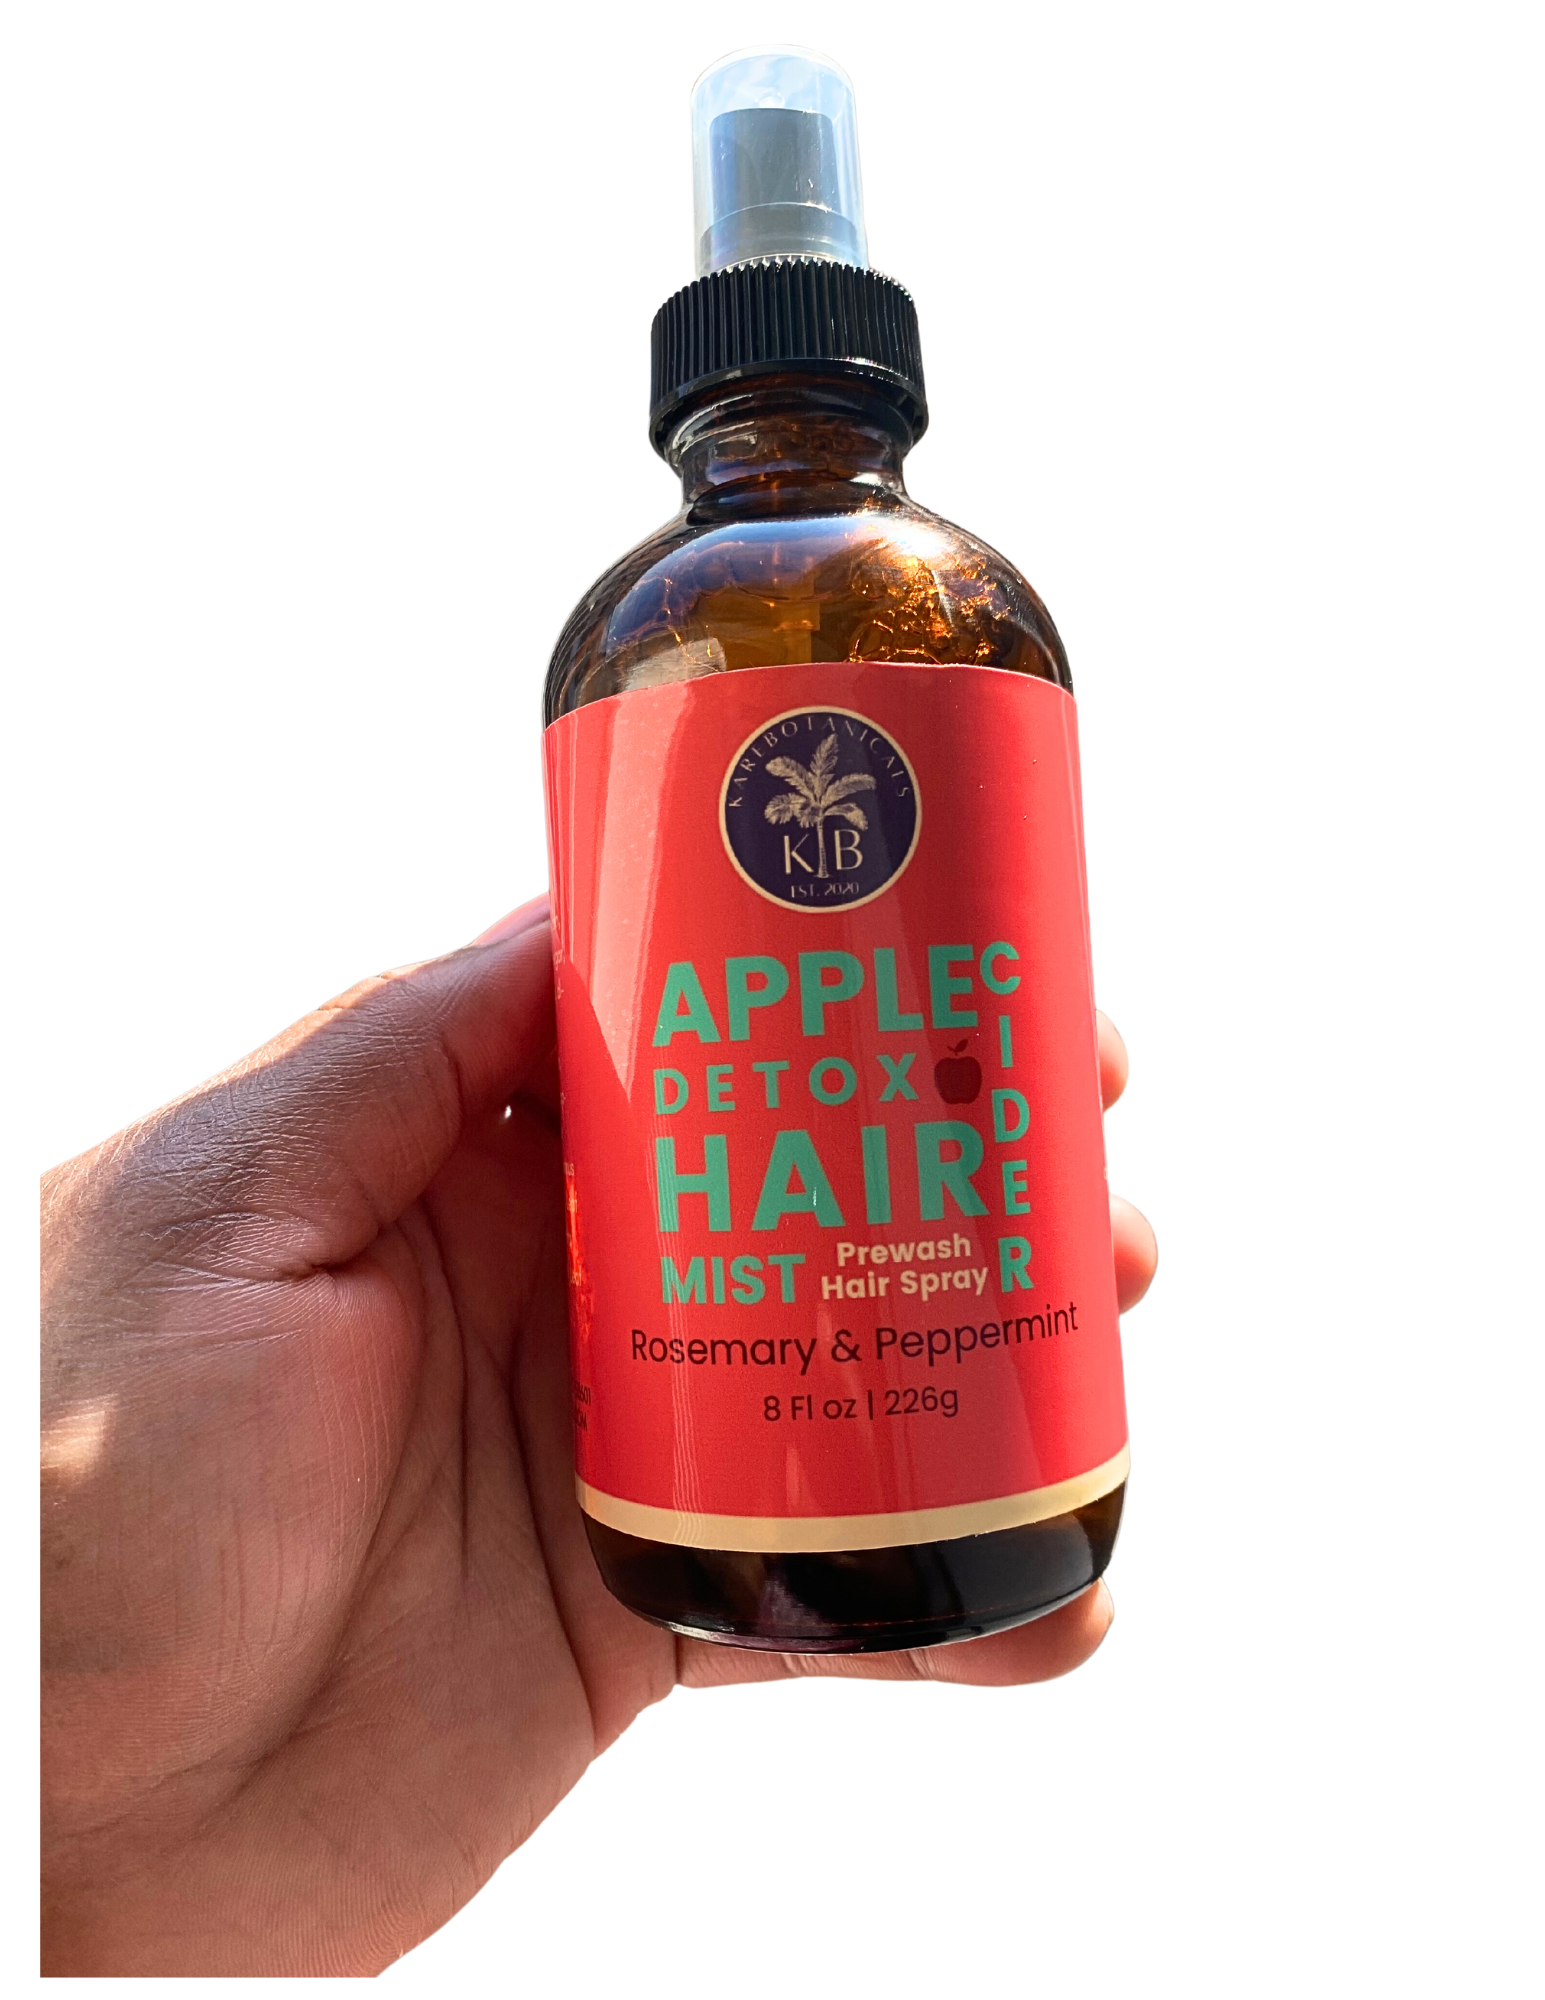 Apple Cider Detox Hair Mist. Prewash Hair Spray to cleanse and loosen dirt and build up on the scalp.